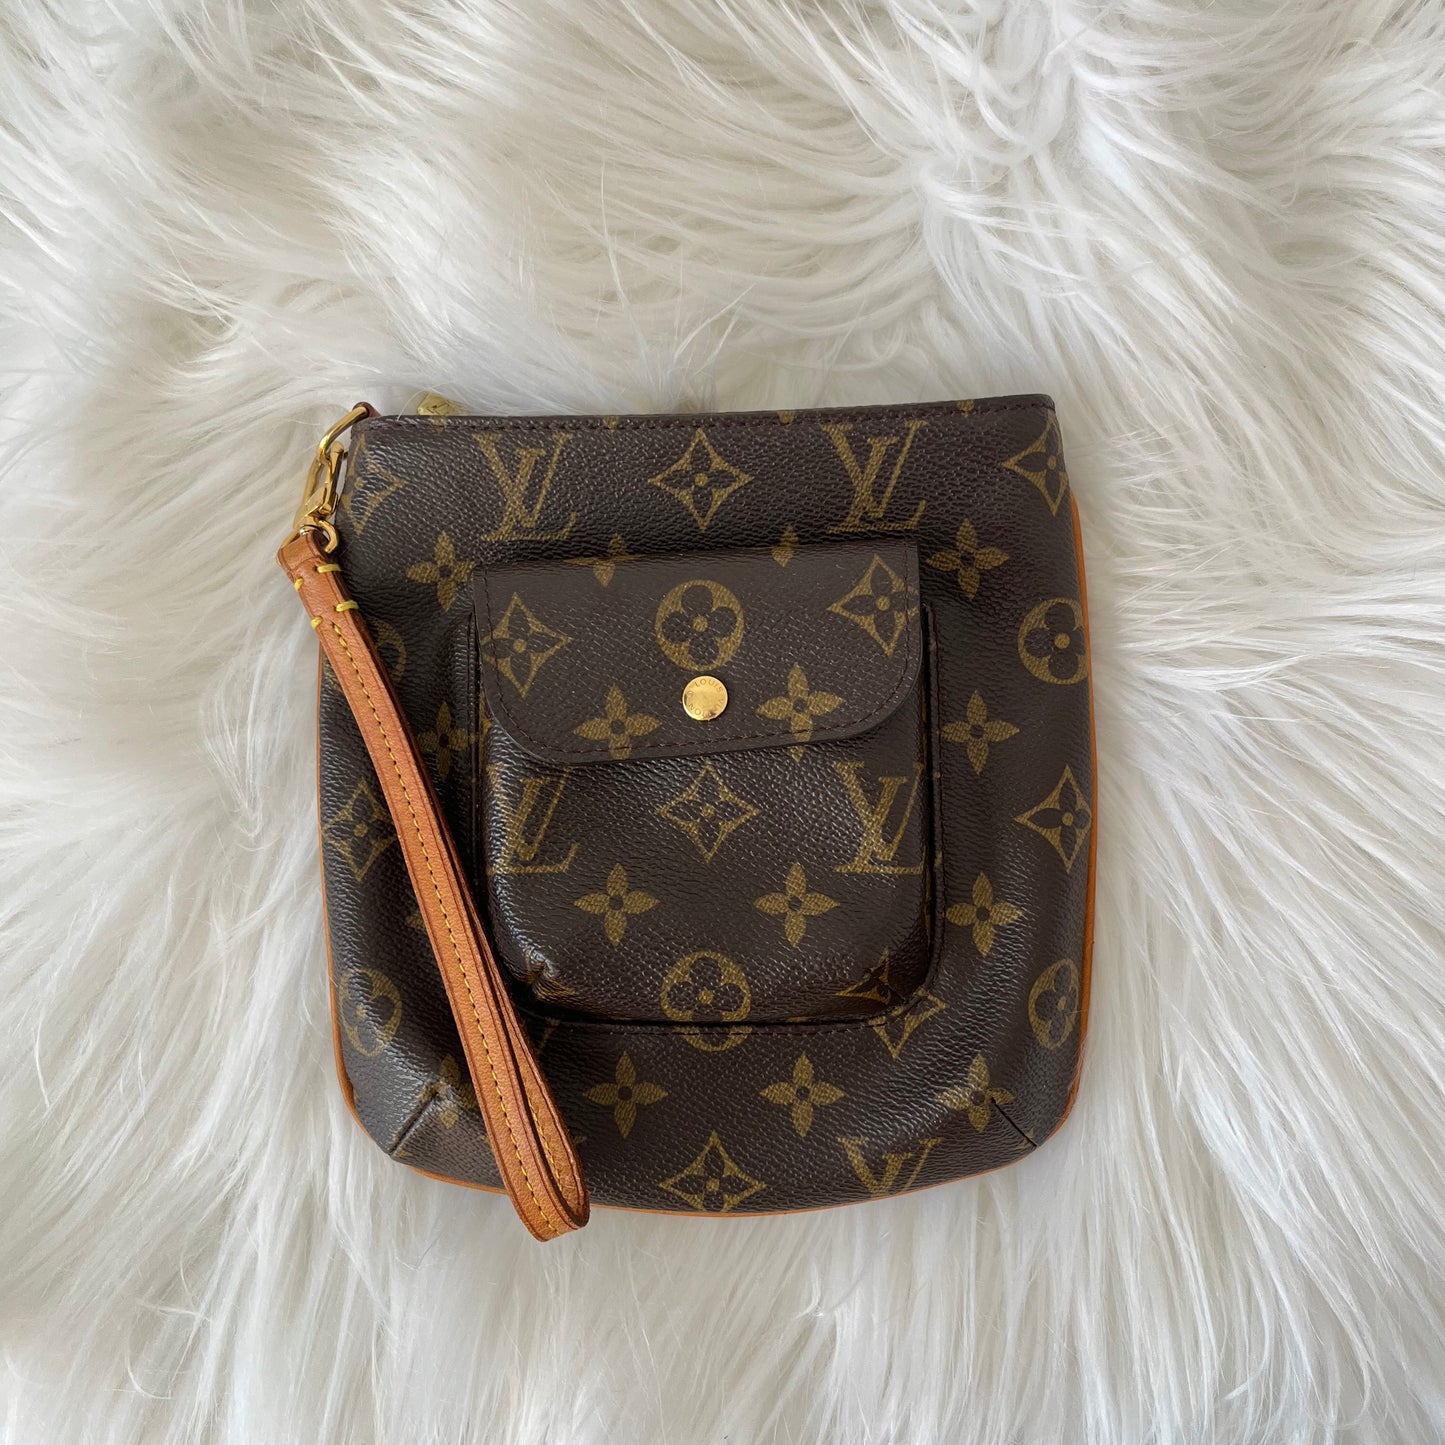 Shop for Louis Vuitton Monogram Canvas Leather Partition Wristlet Bag -  Shipped from USA